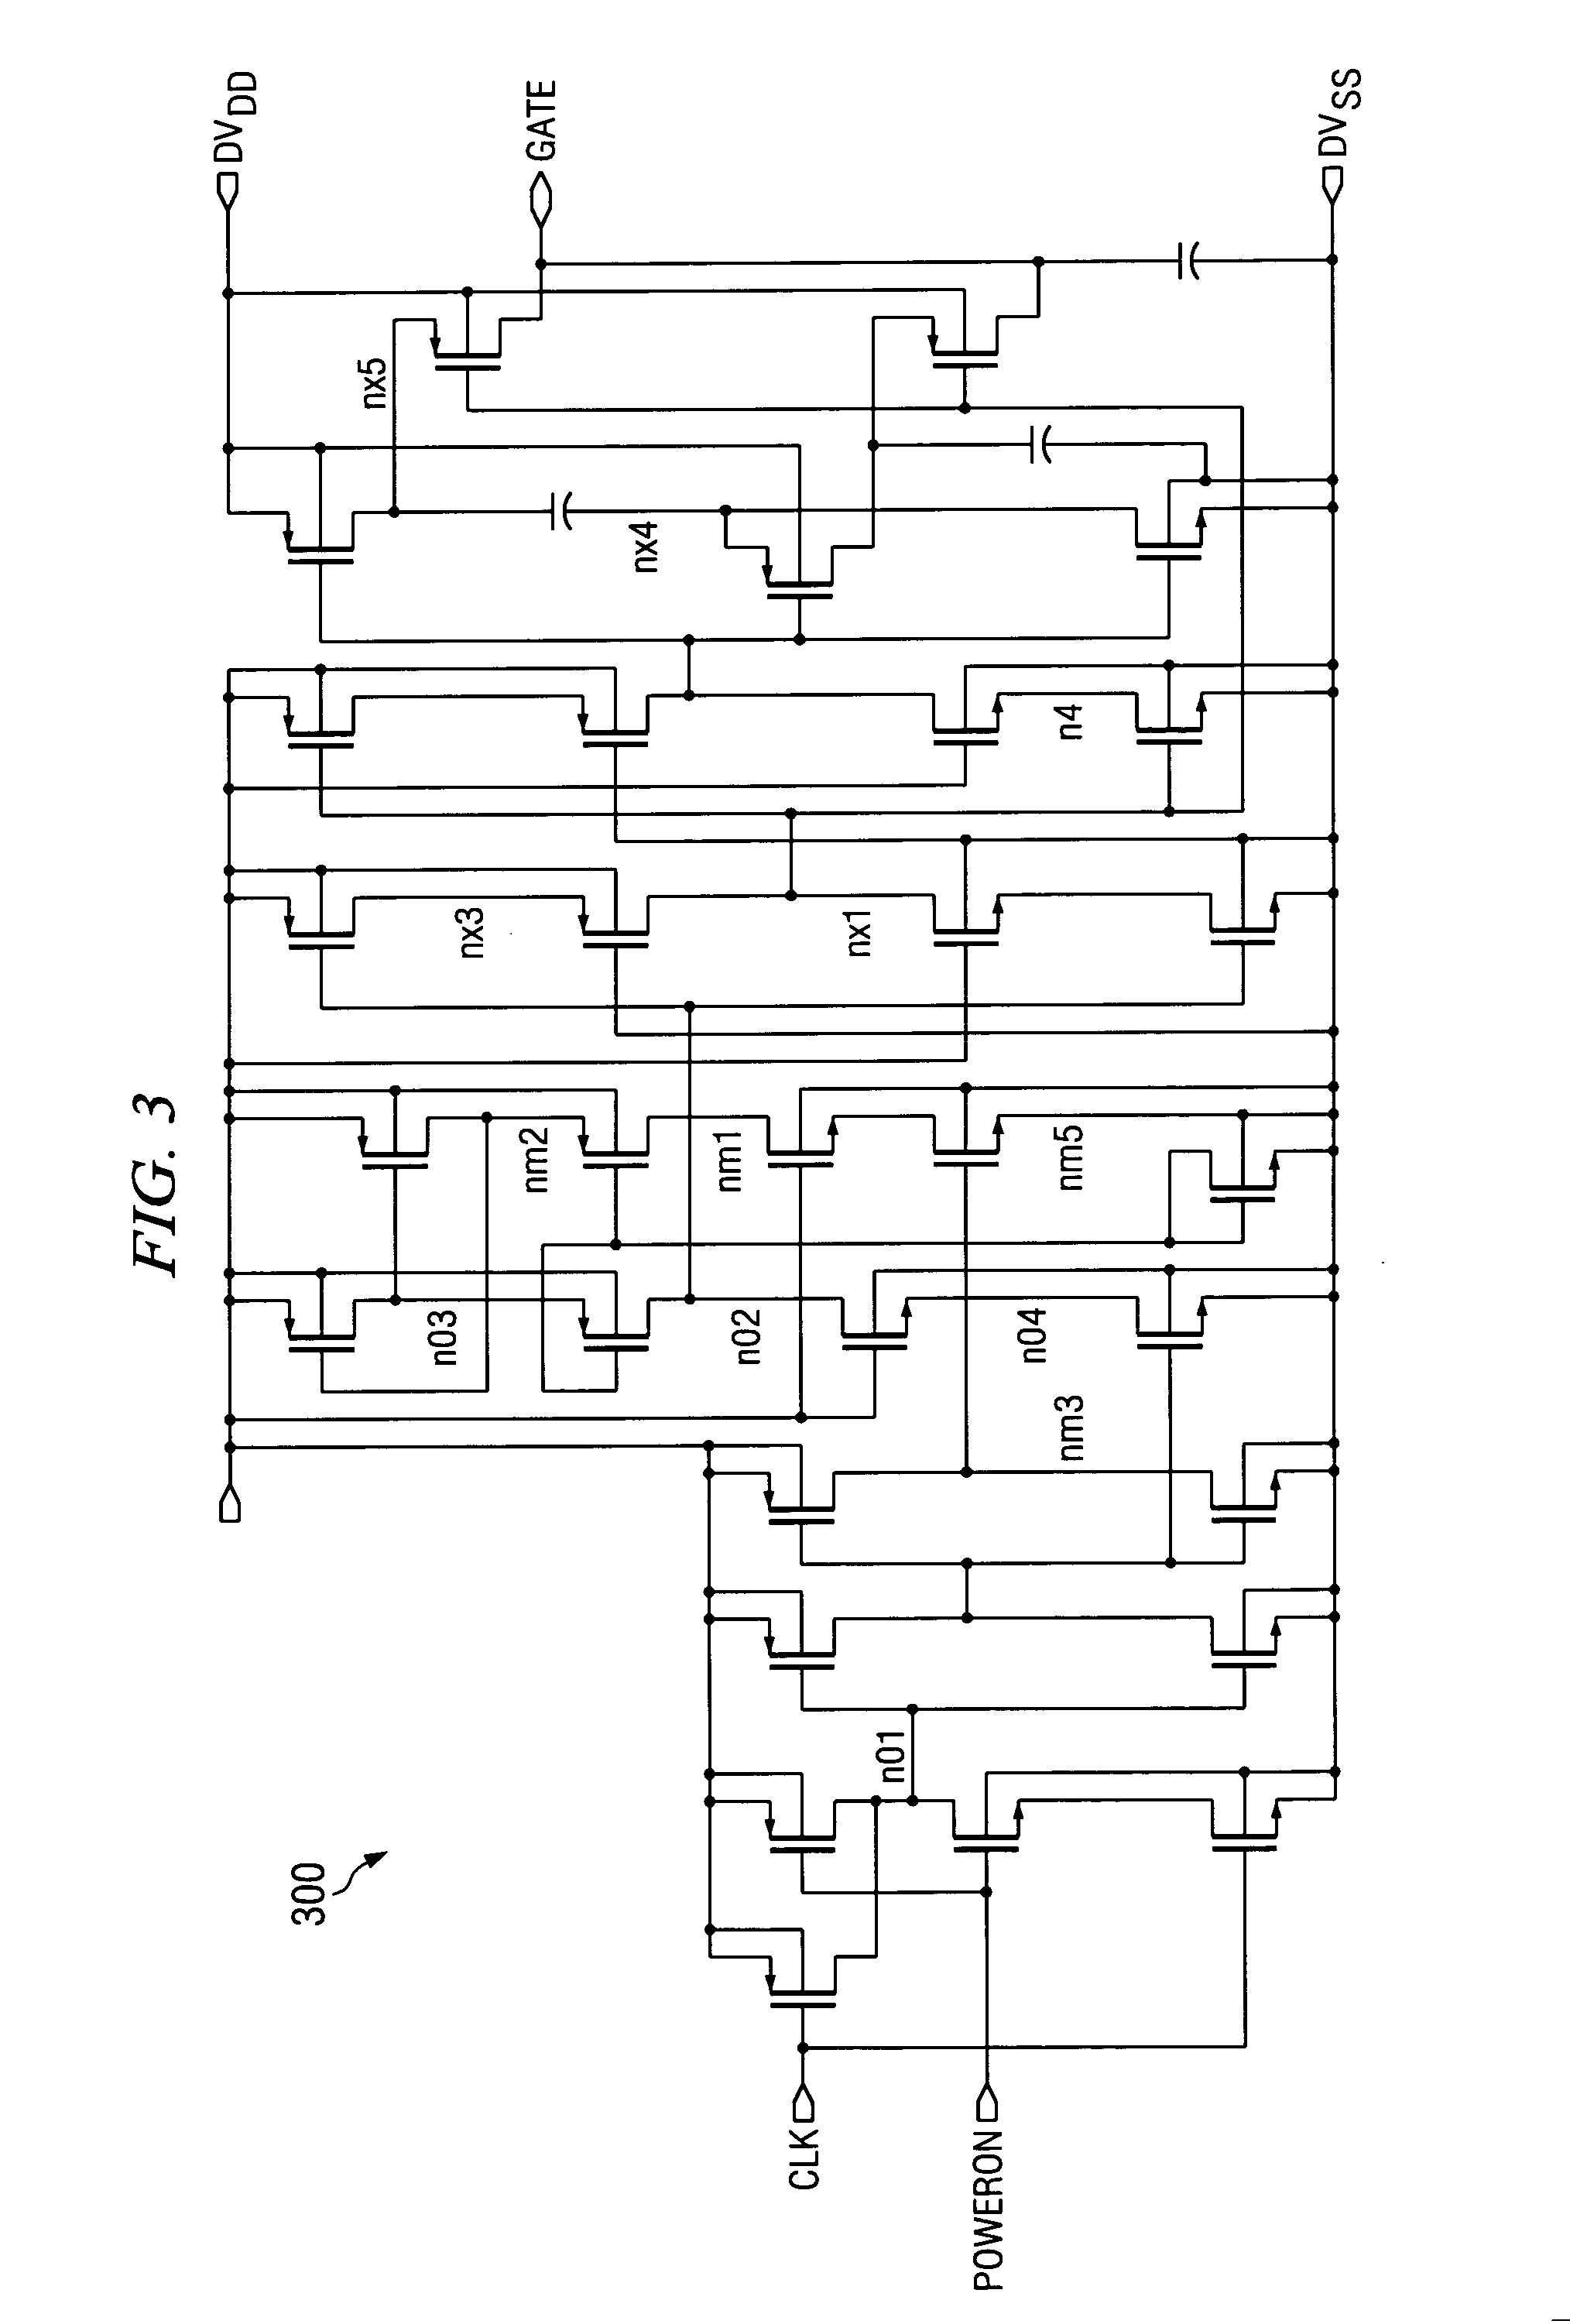 Circuit for reducing standby leakage in a memory unit